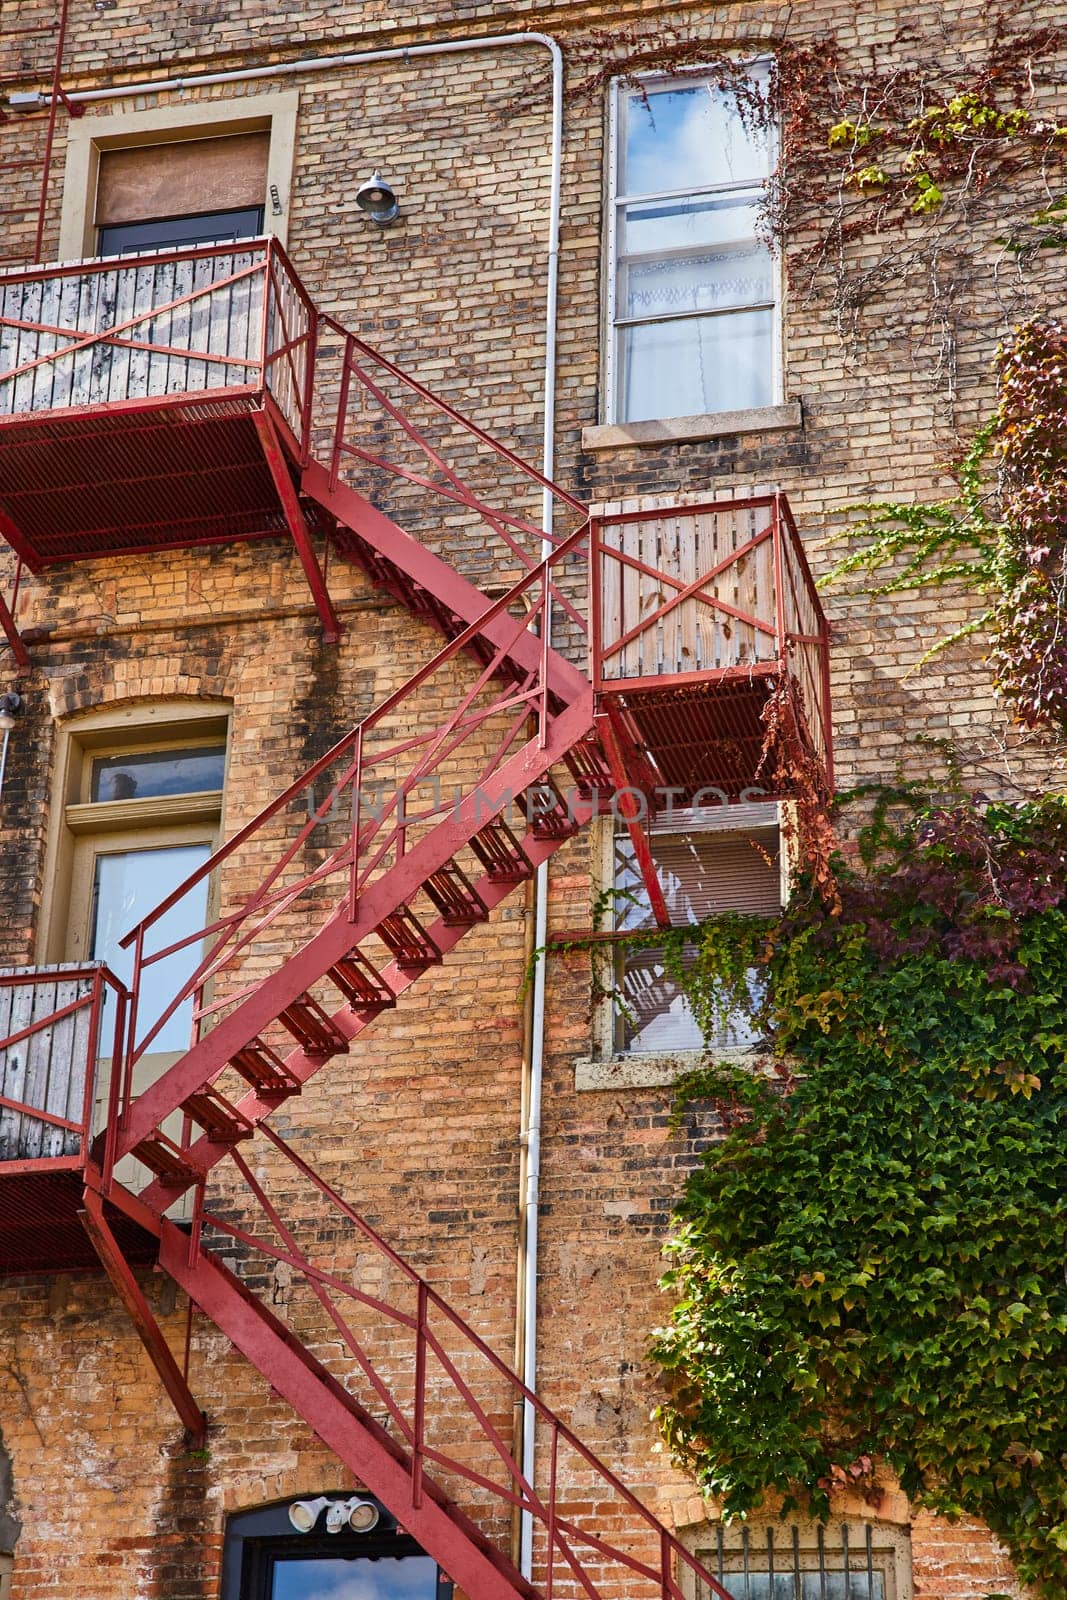 2023 view of a rustic brick building with a red fire escape and climbing ivy in Downtown Elkhart, Indiana showing urban resilience over time.